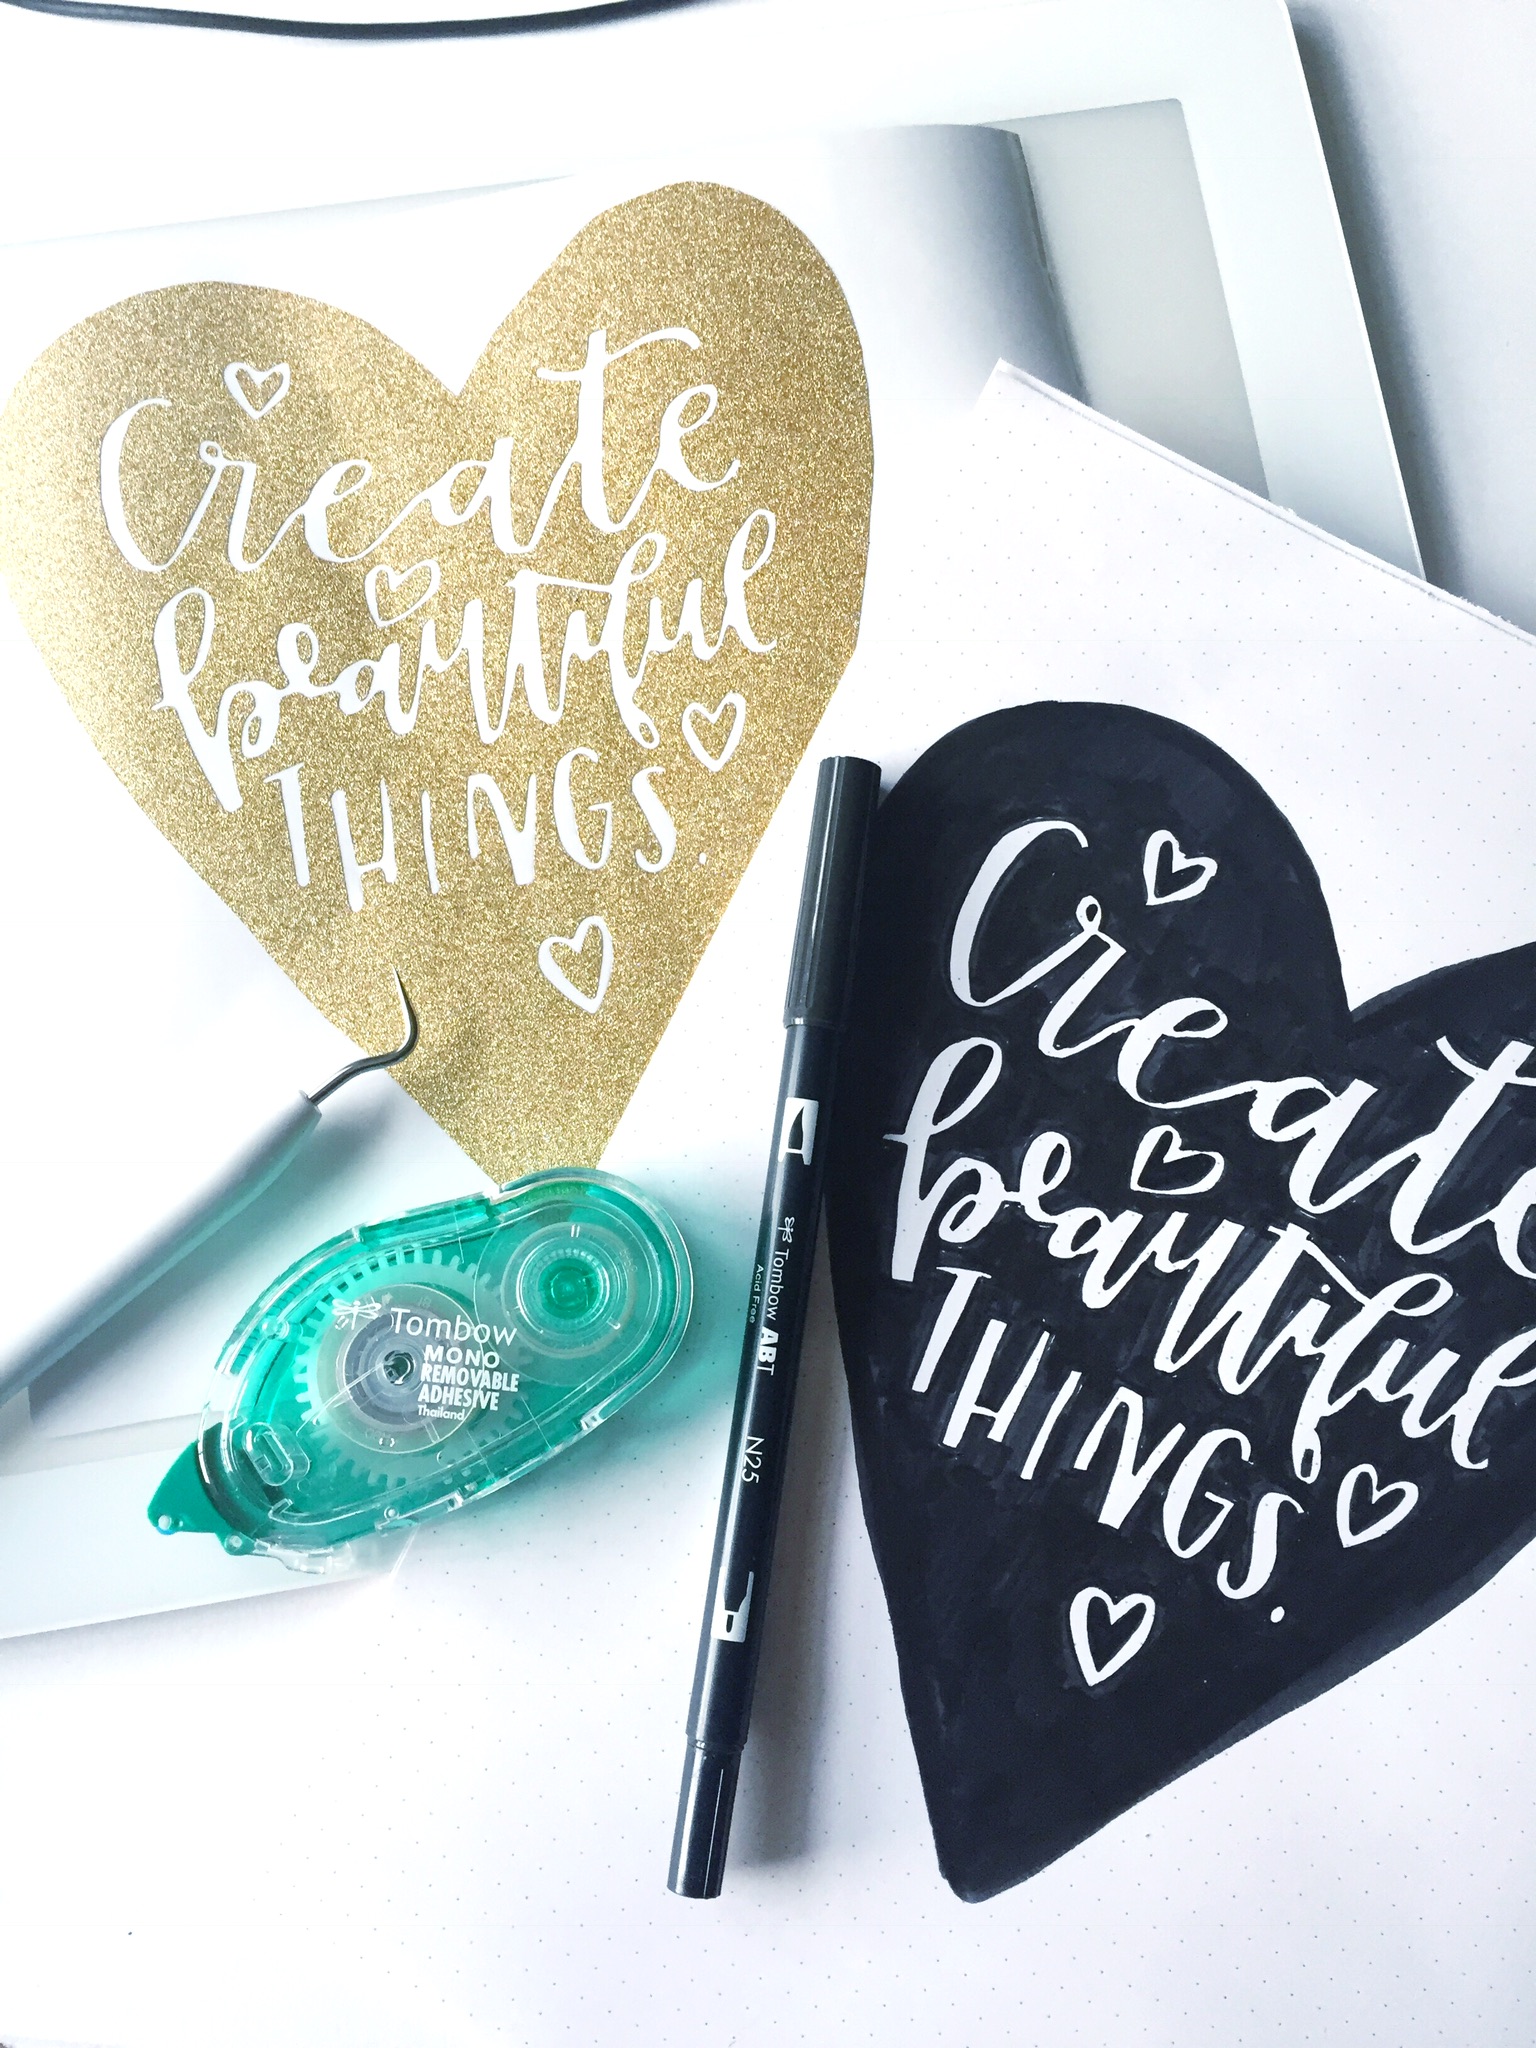 Lauren Fitzmaurice of @renmaecalligraphy takes you through 10 easy steps of transforming your own lettering into a fun and unique vinyl project using Cricut and Tombow USA products. For more lettering tips and tricks, follow Lauren on Instagram @renmadecalligraphy or on renmadecalligraphy.com.